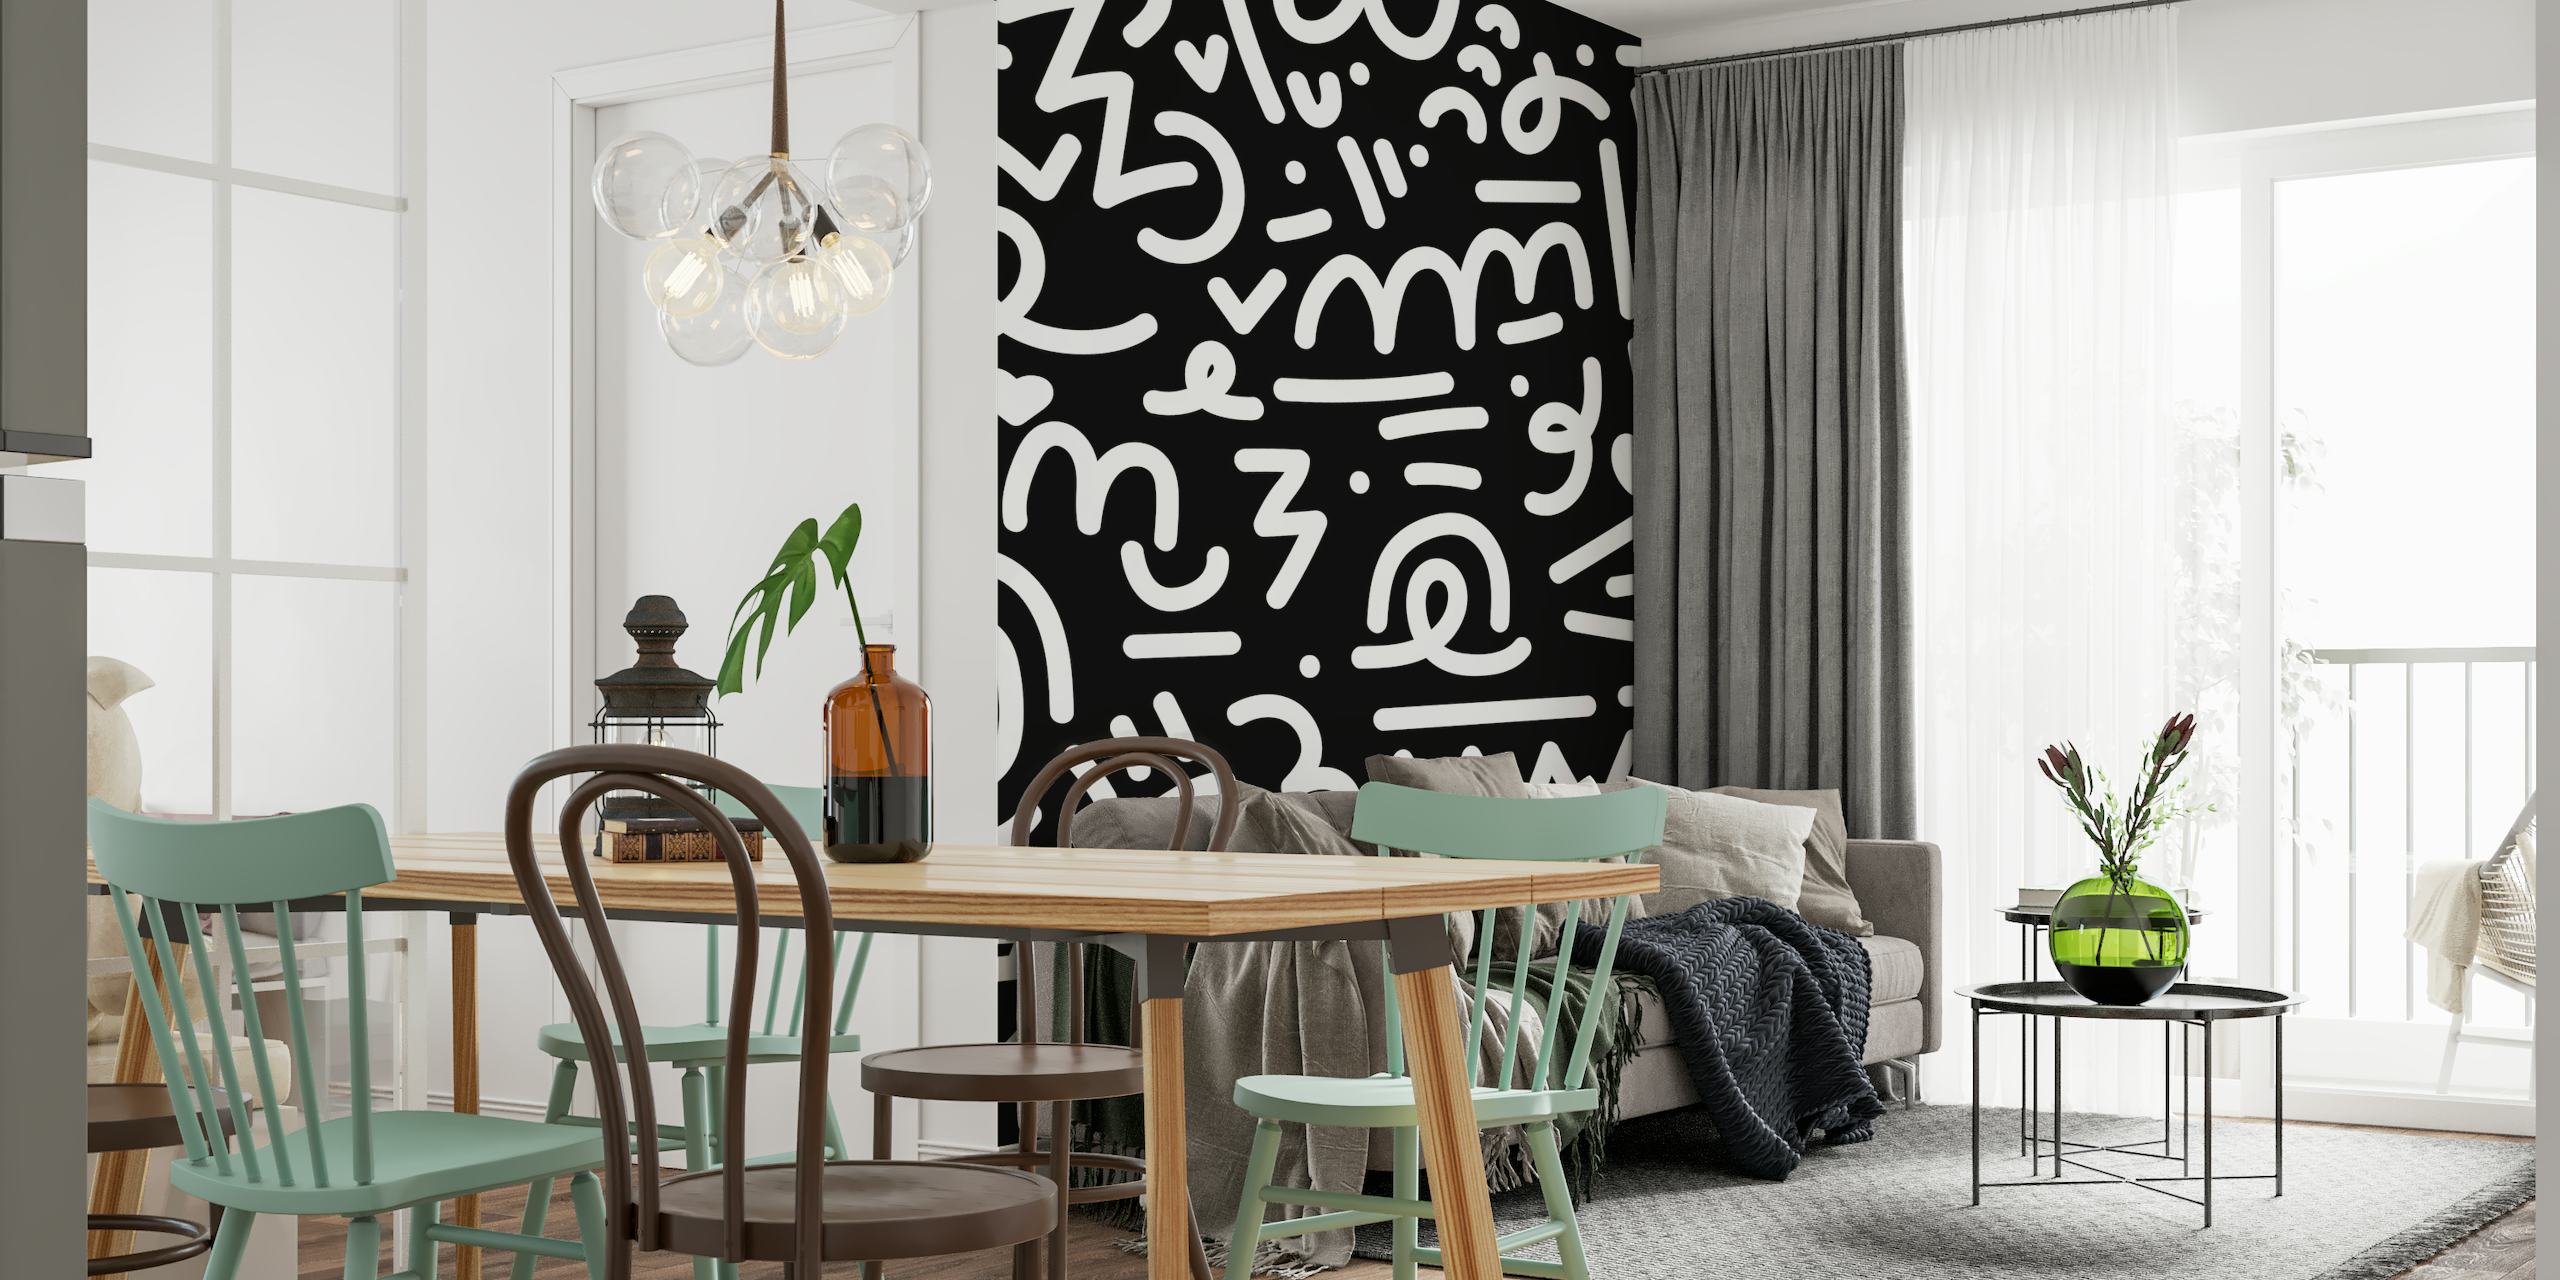 A wall mural with black and white doodles, featuring whimsical hand-drawn elements.